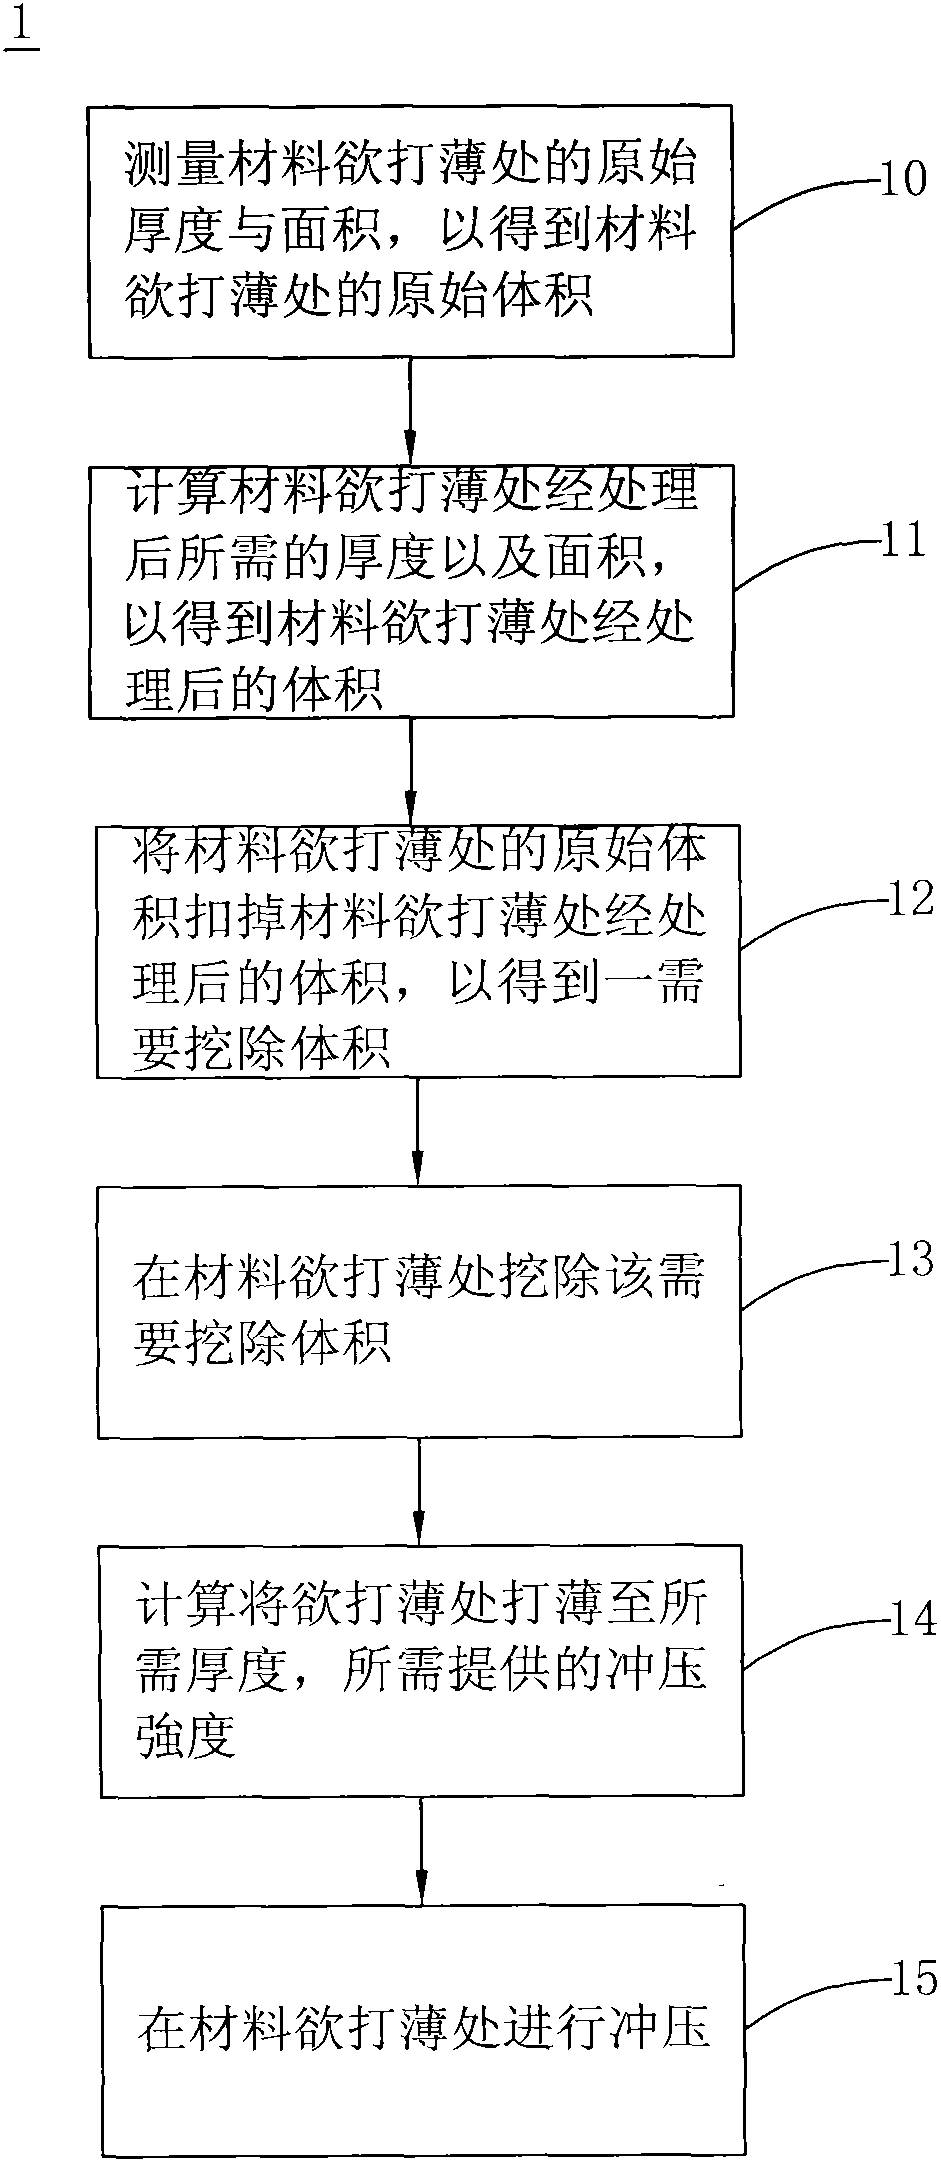 One-step press forming process and manufacturing method of CPU (Central Processing Unit) back board